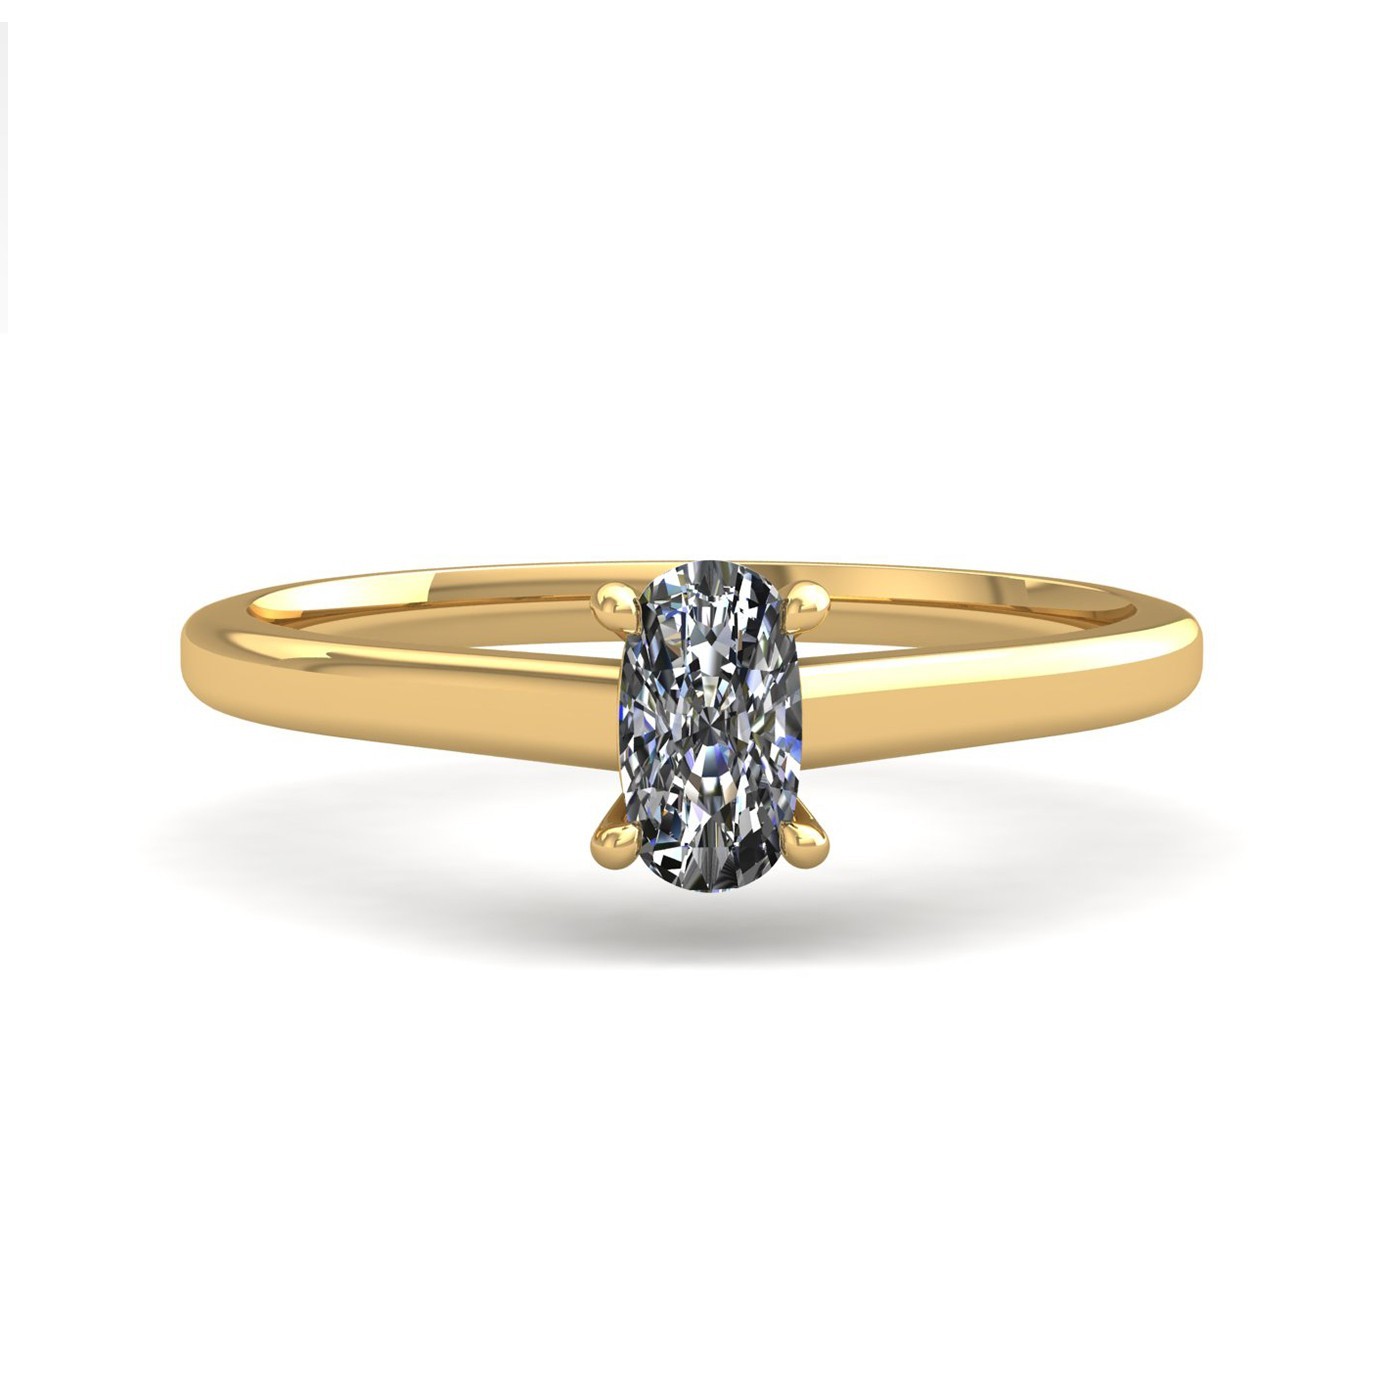 18k yellow gold 1,20 ct 4 prongs solitaire elongated cushion cut diamond engagement ring with whisper thin band Photos & images